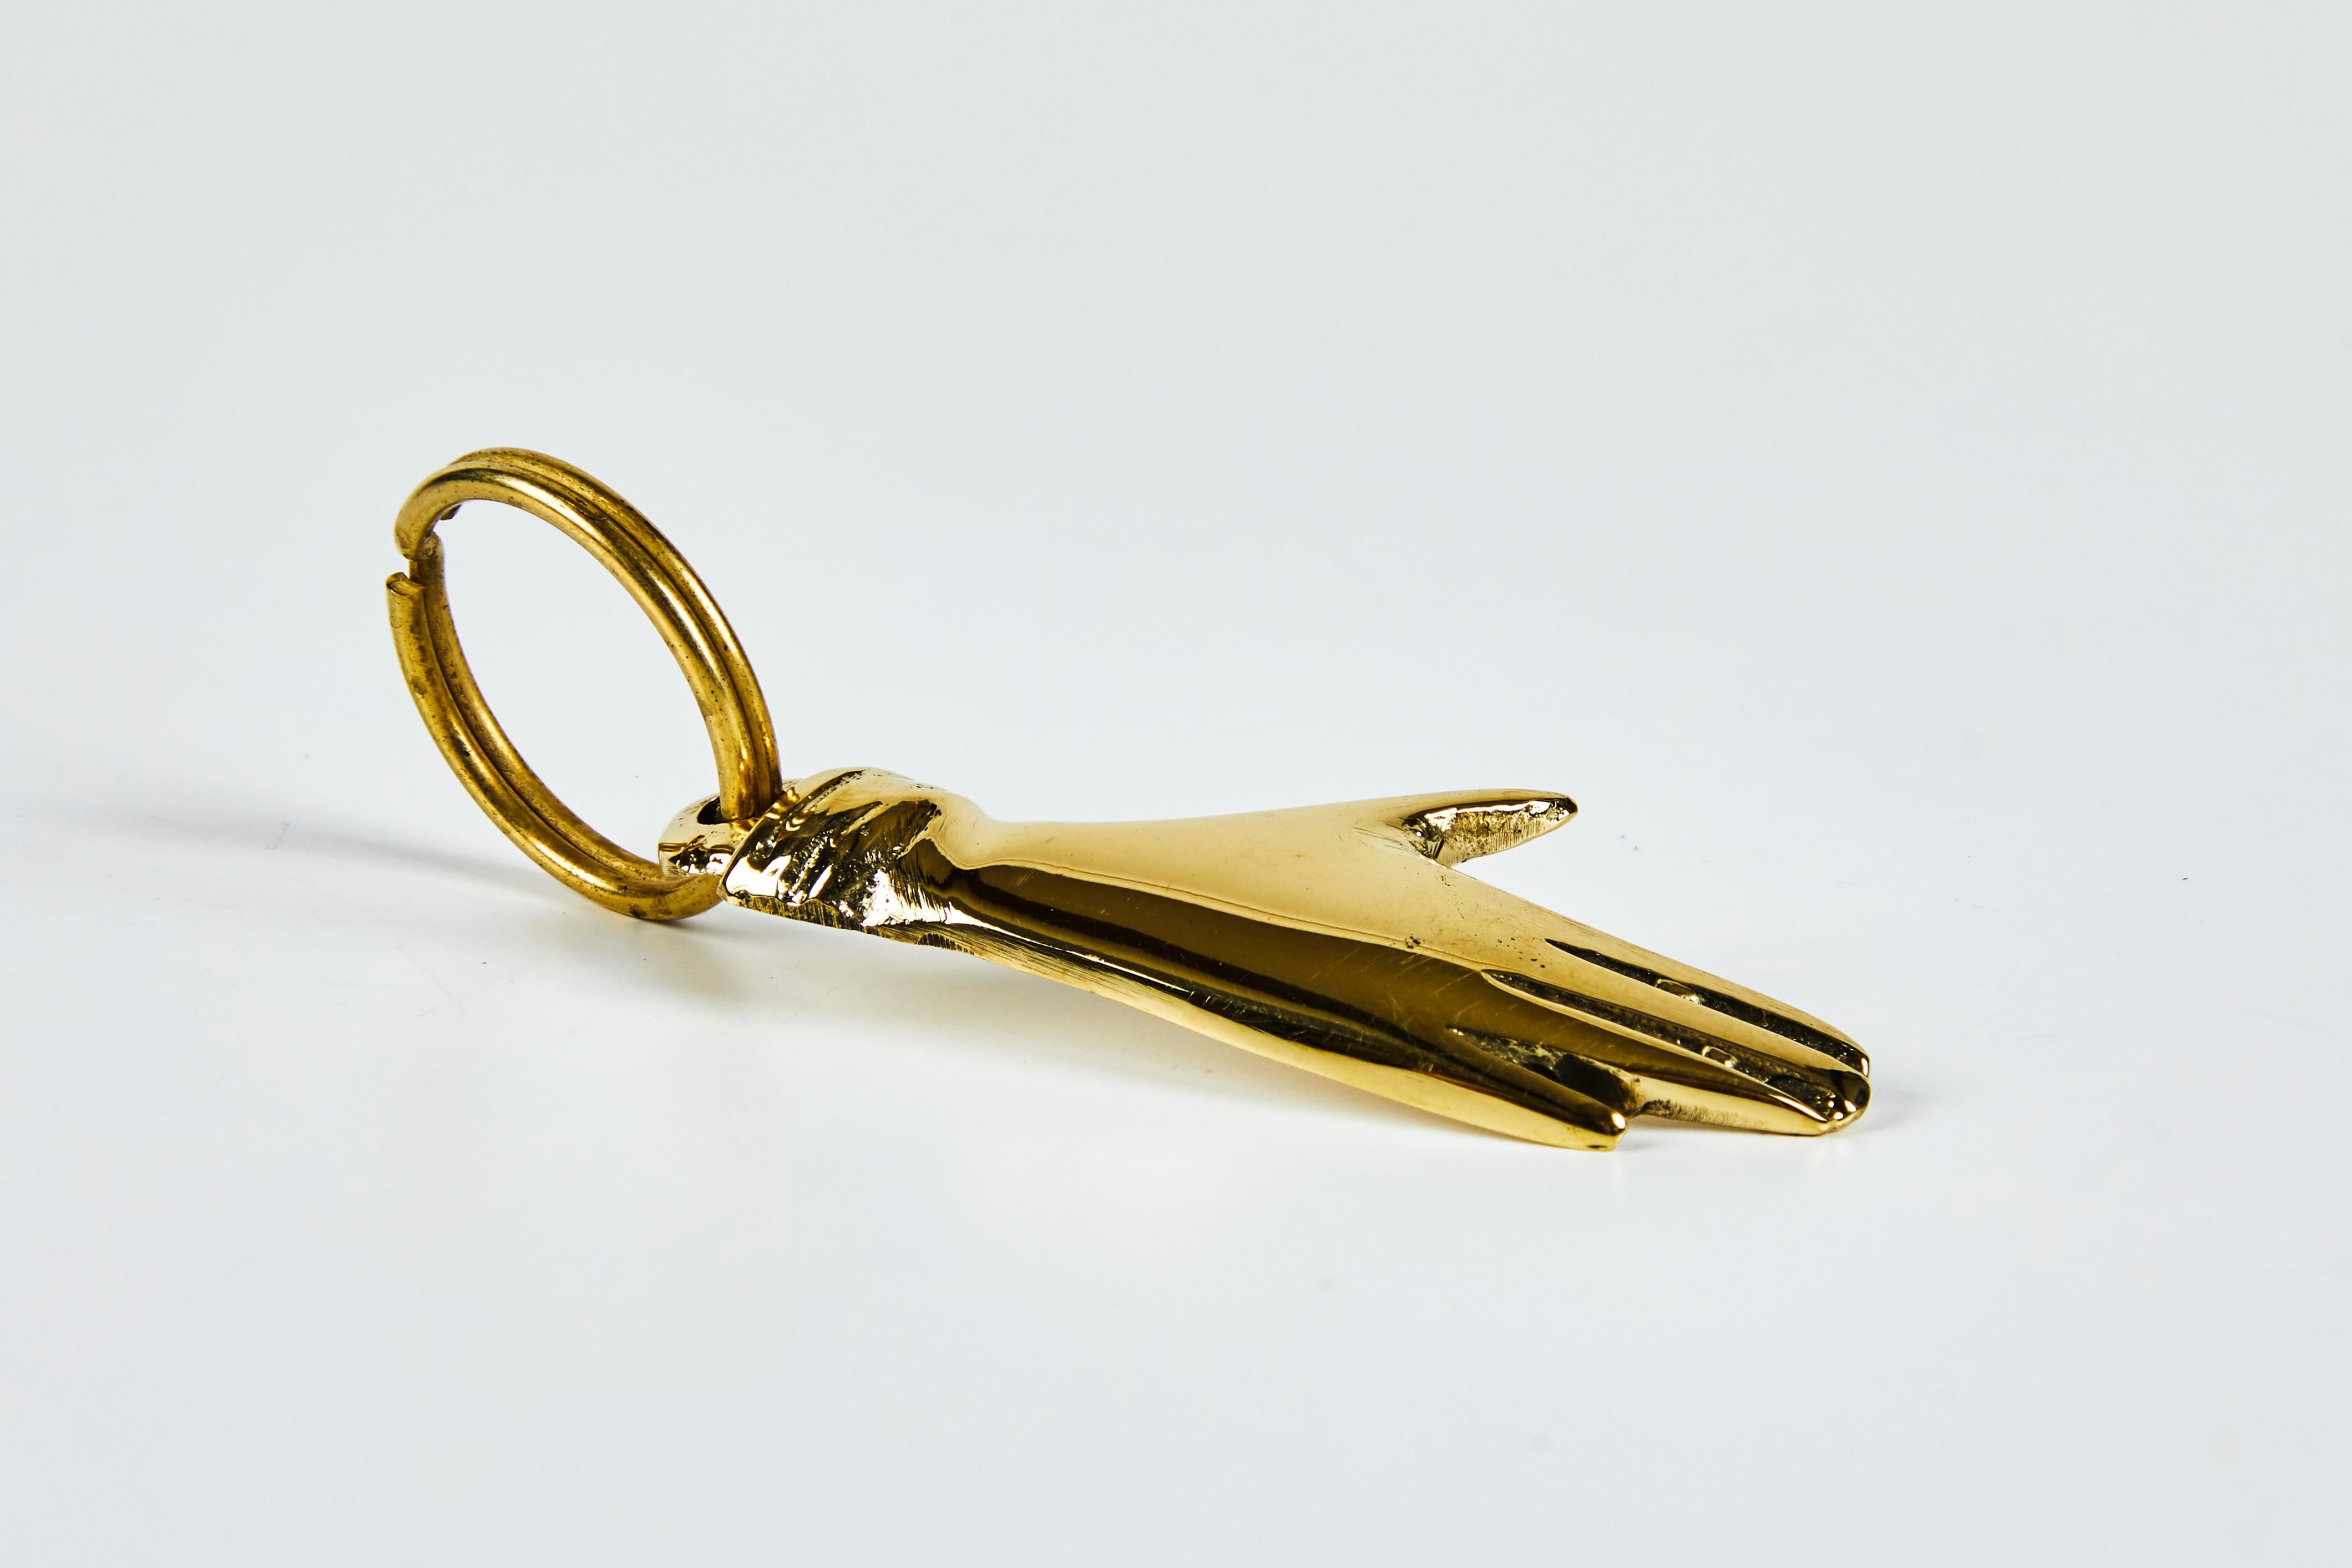 Carl Auböck model #5734 'Hand' brass figurine keyring. Designed in the 1950s, this incredibly refined and sculptural object is hand fabricated in polished brass. 

Price is per item. One in stock ready to ship. Available in unlimited quantities.